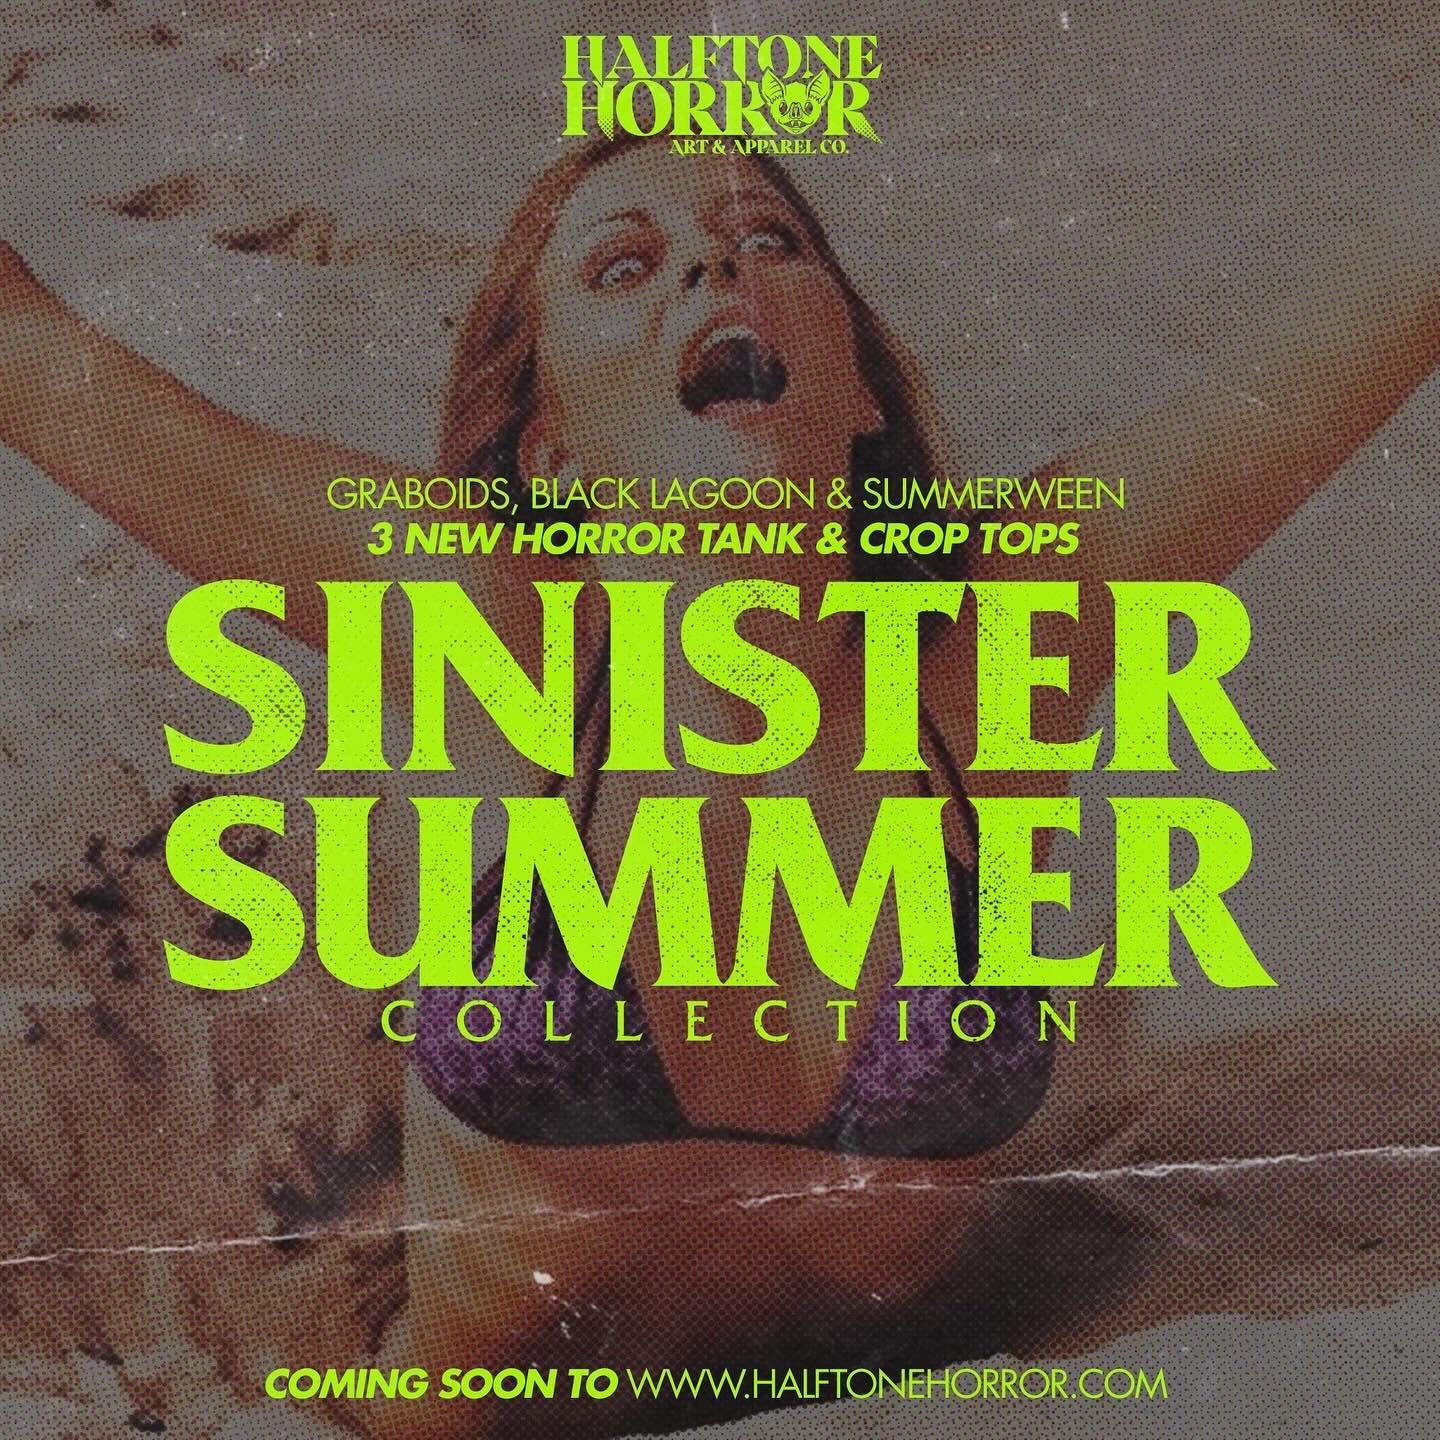 It&rsquo;s heating up to be a SINISTER SUMMER 🔥
.
We&rsquo;ve heard your calls for some spooky summertime gear and have cooked up something special. Catch our Sinister Summer collection heading to our shop soon. Stay tuned for reveals 💀
.
#sinister